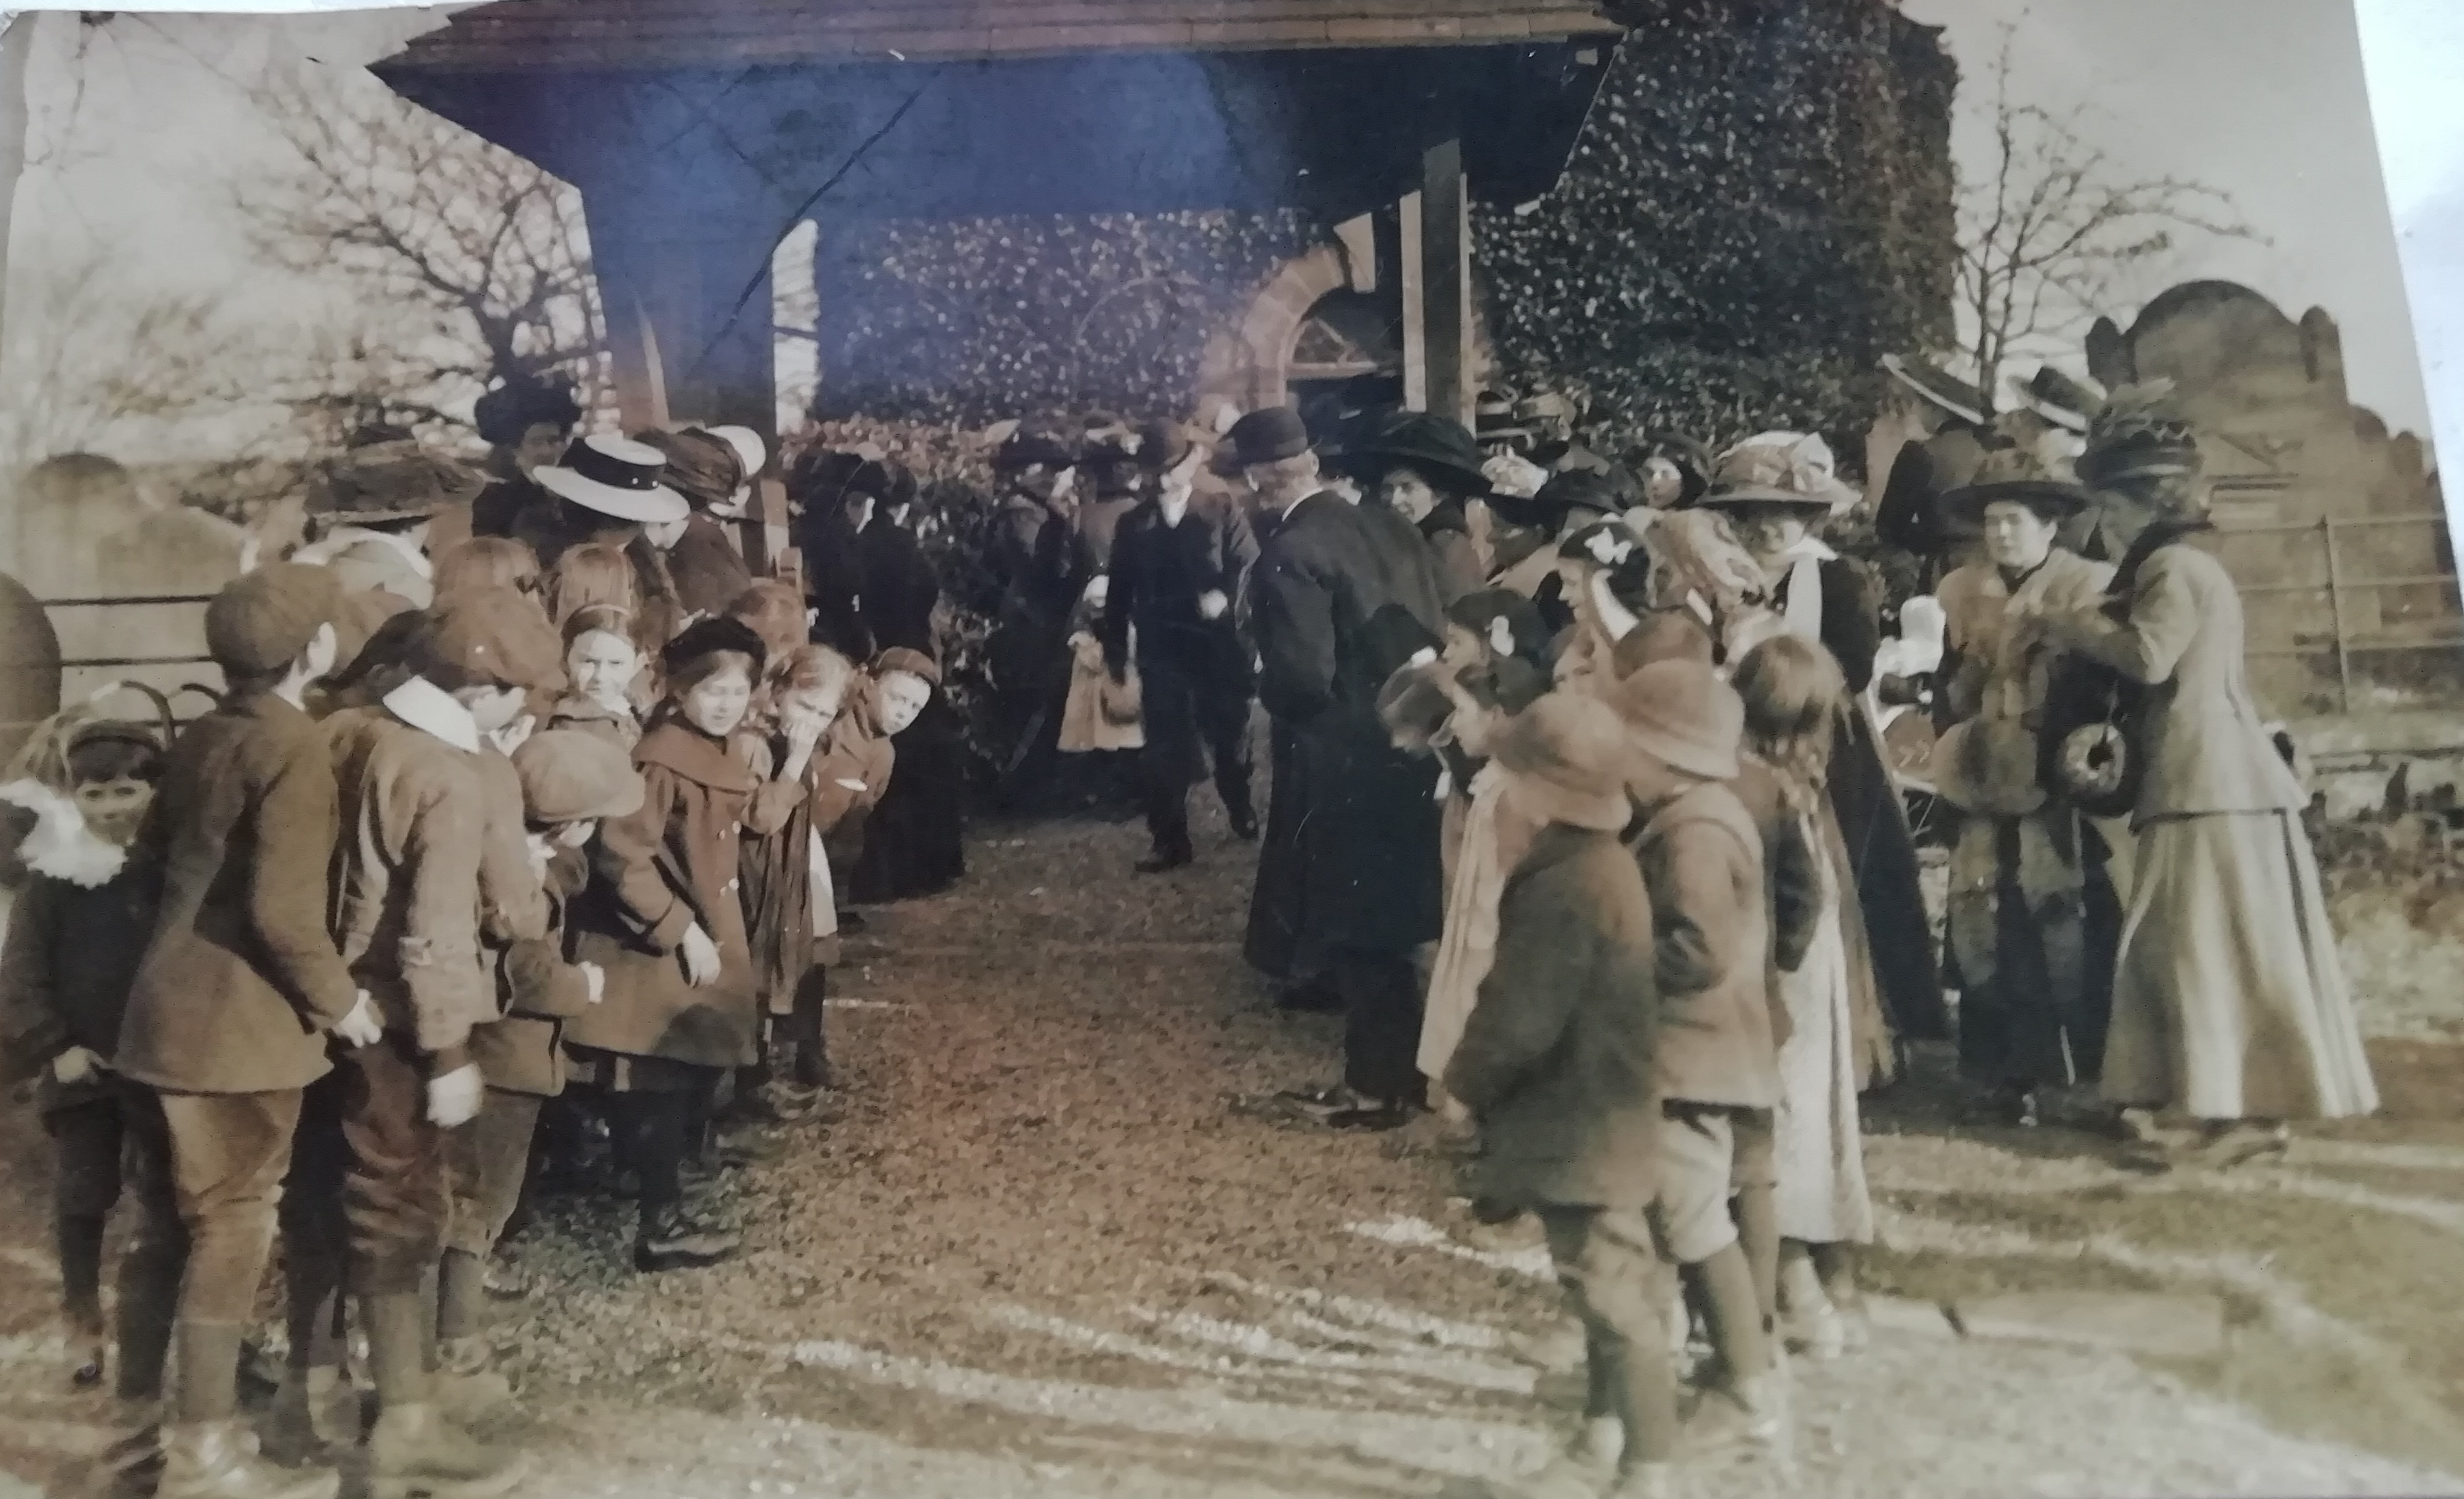 Black and white photograph of wedding party by lychgate. 1911.